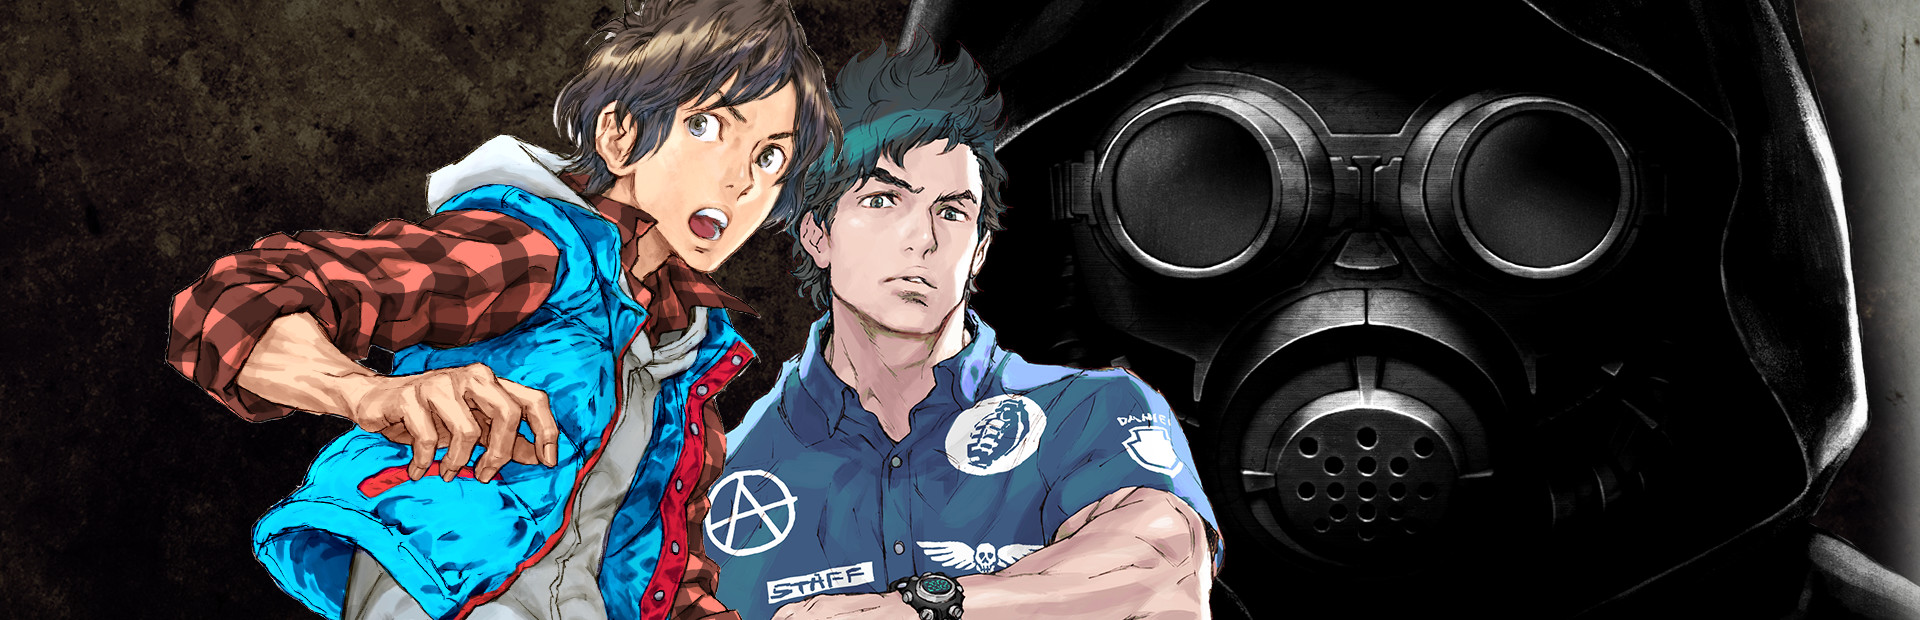 There are far more images available for Zero Escape: The Nonary Games